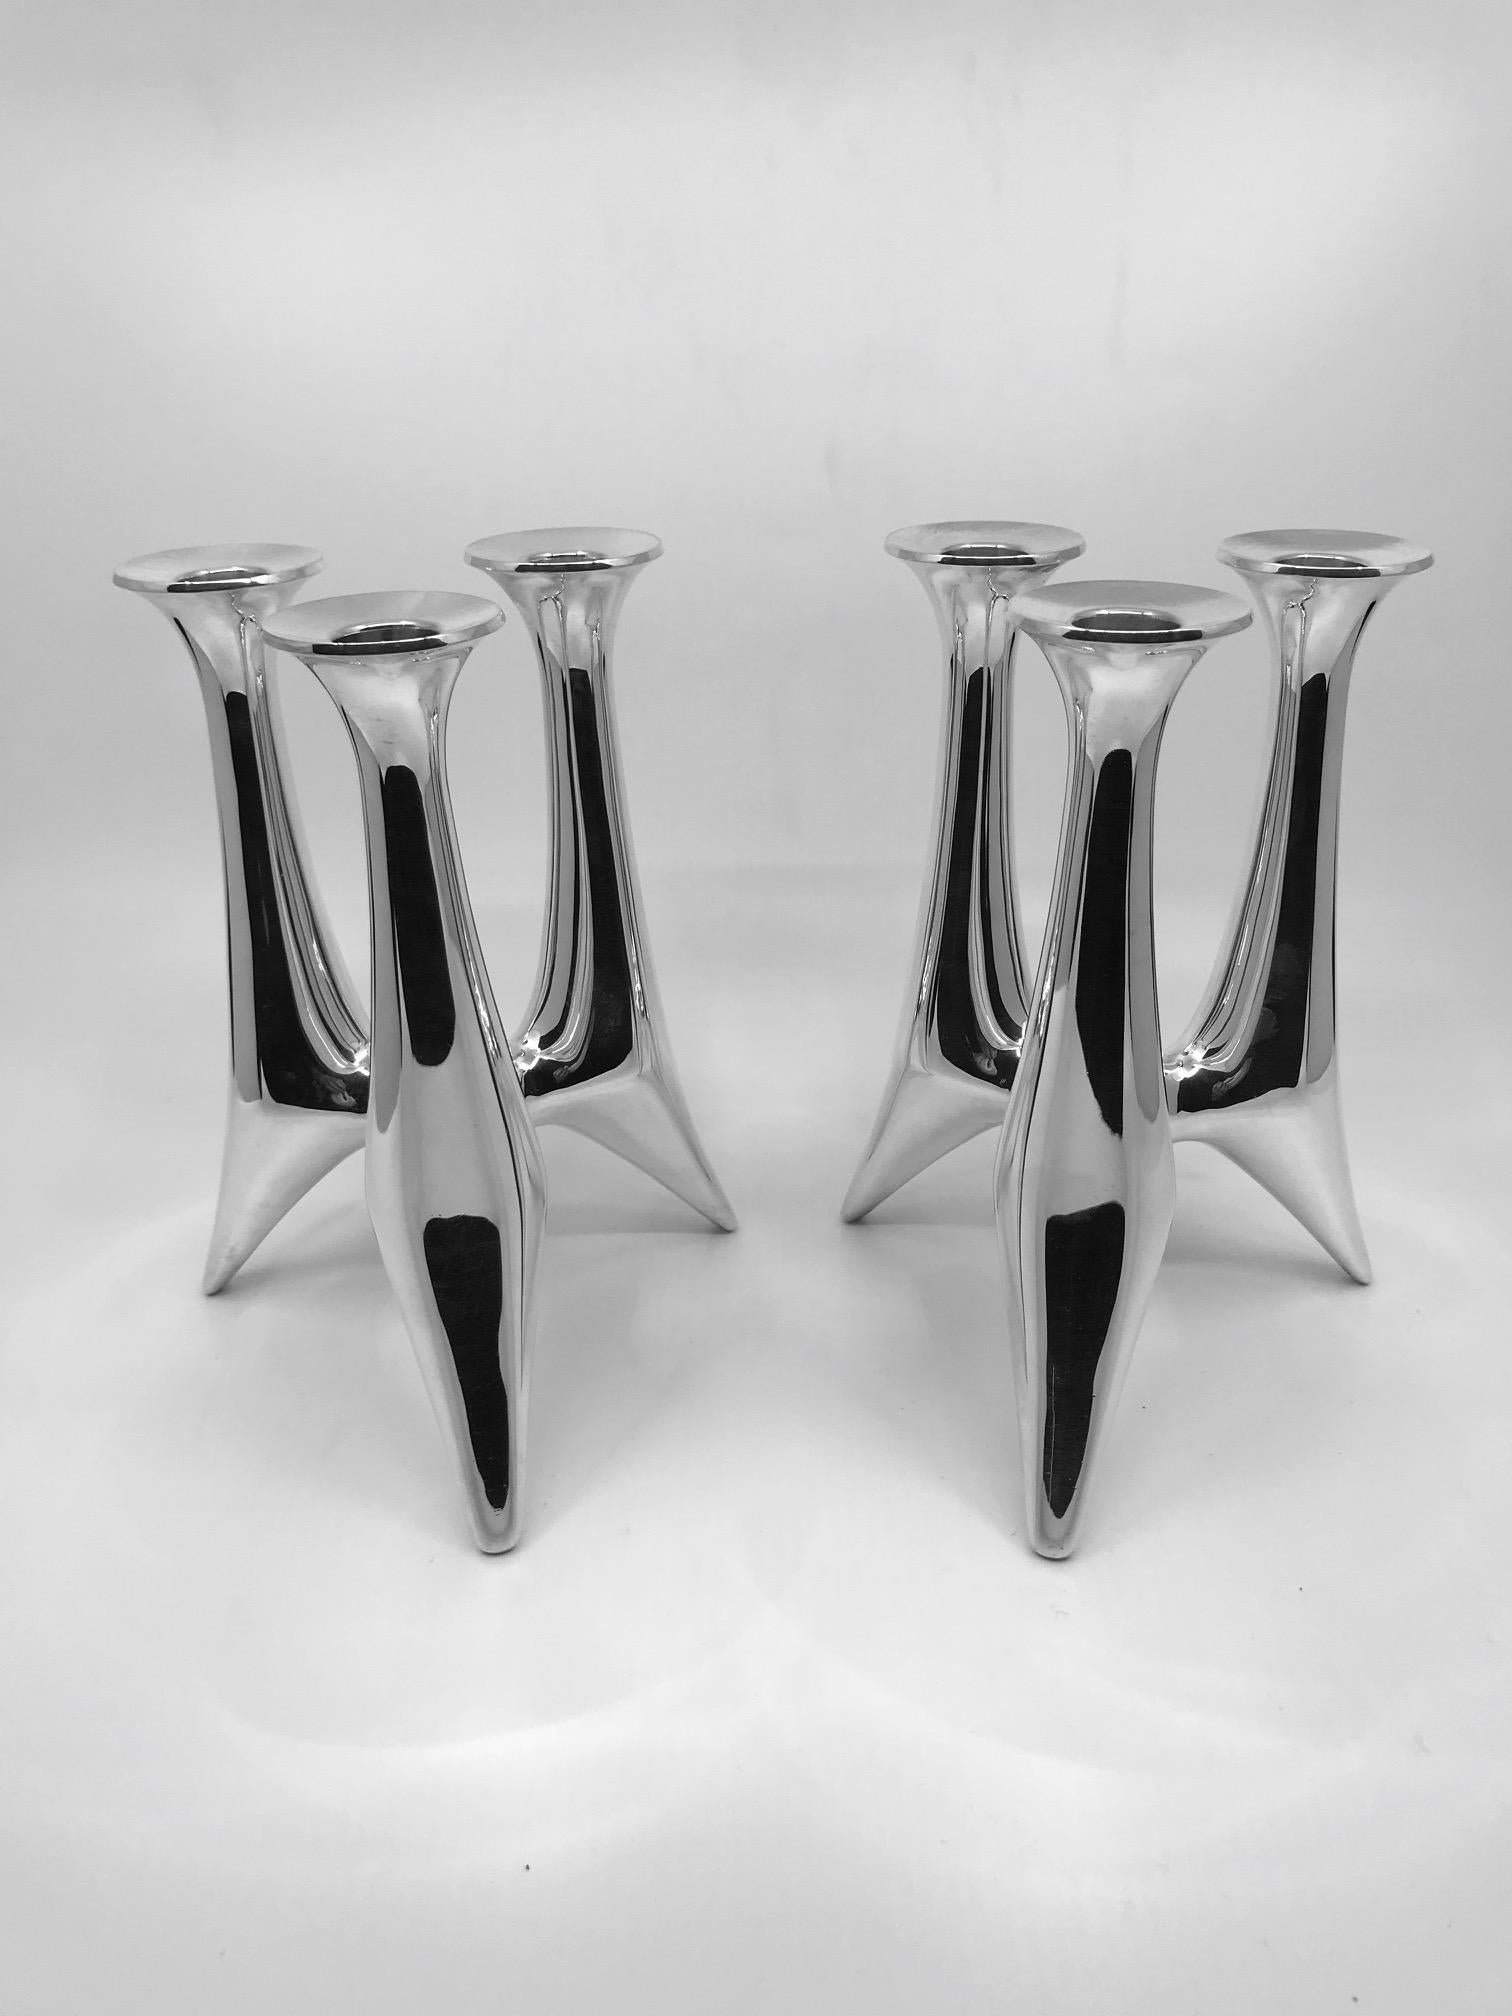 This is a pair of midcentury sterling silver Hans Hansen three-light candelabra, design #494 by Bent Gabrielsen. These candelabra are completely handmade and hollow.

Measures: 7 3/8